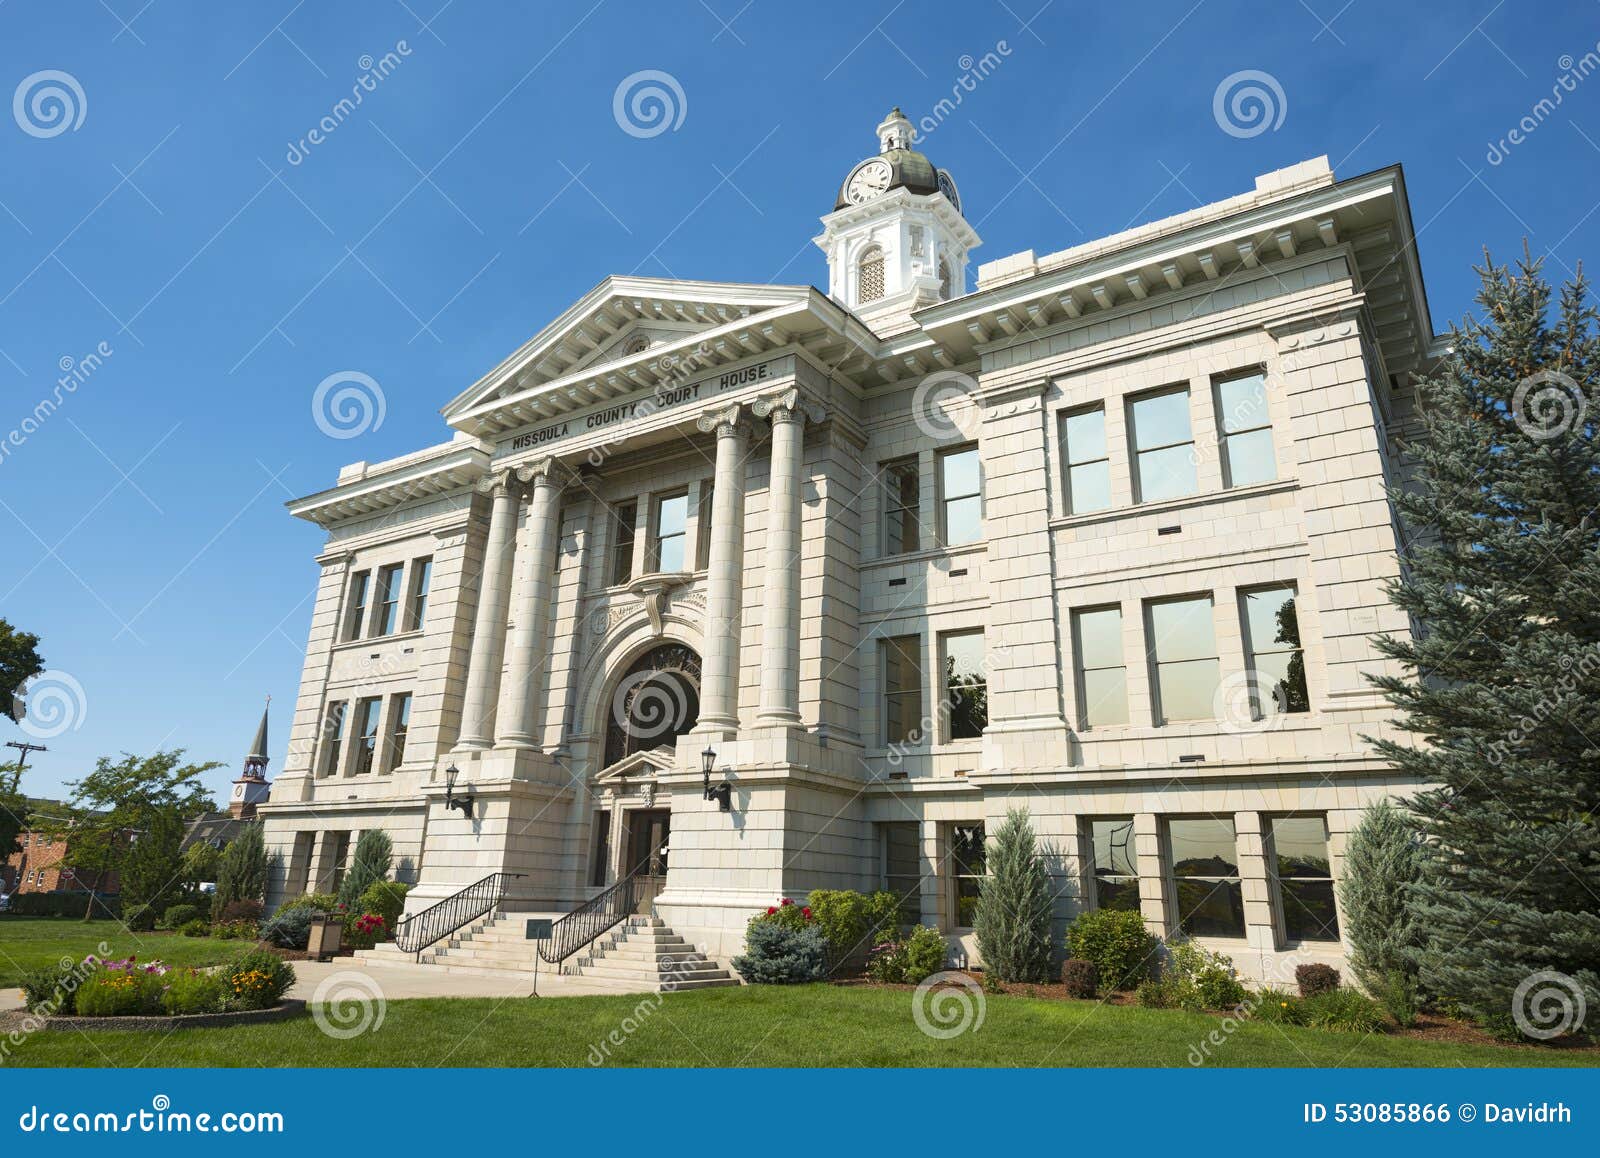 county courthouse in missoula, montana front right